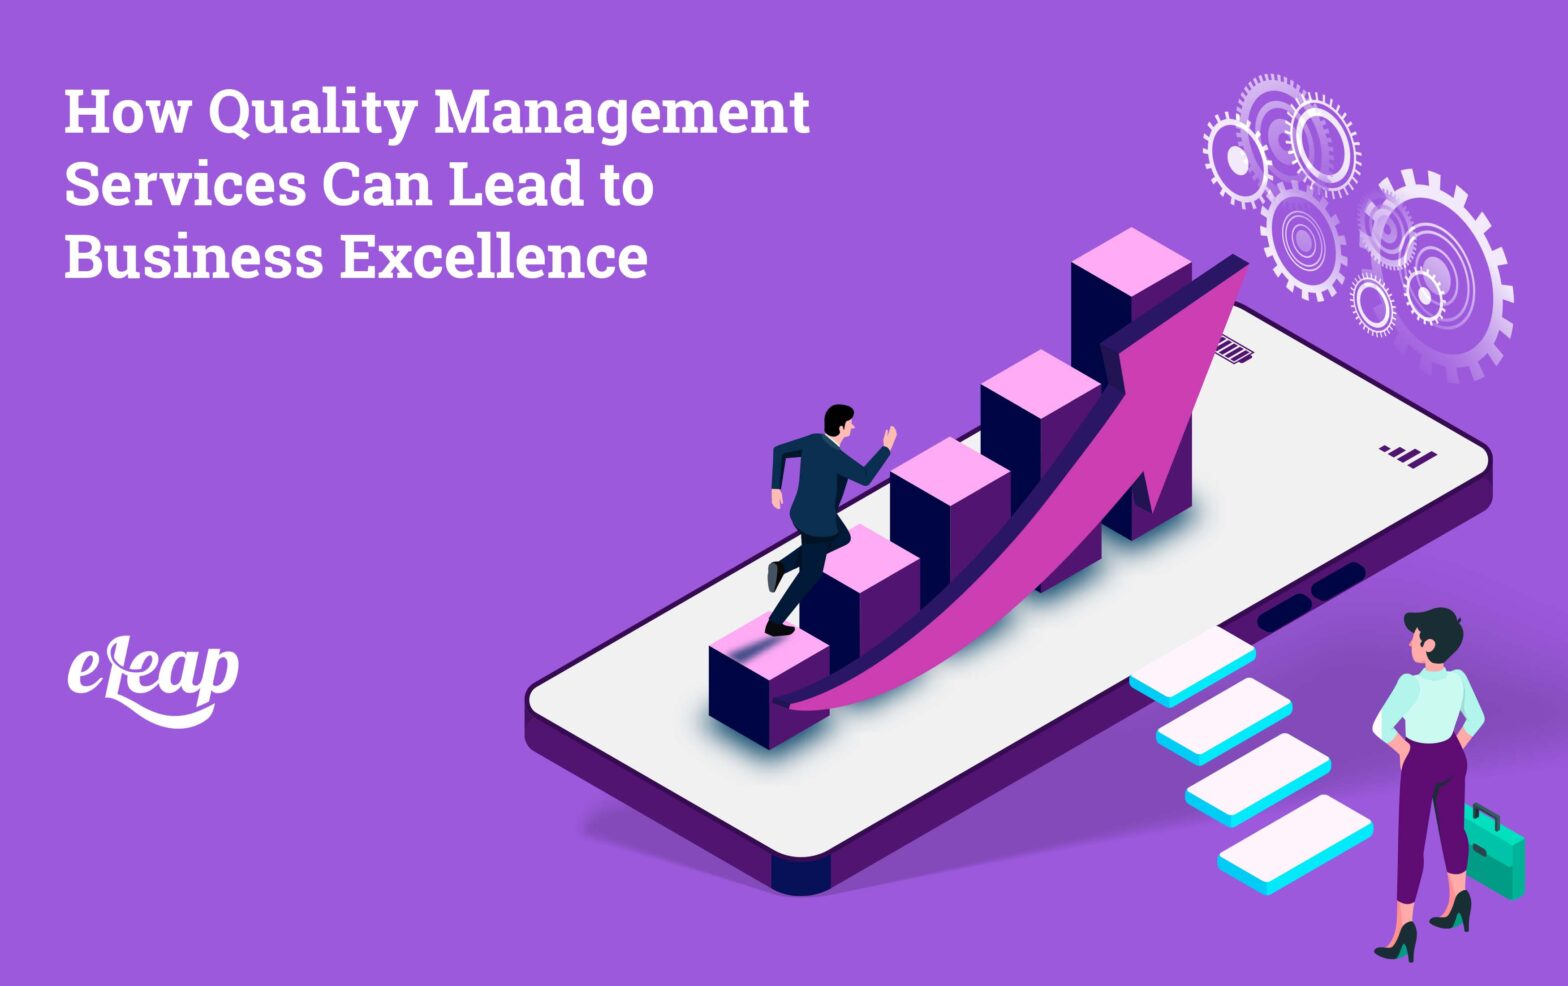 How Quality Management Services Can Lead to Business Excellence